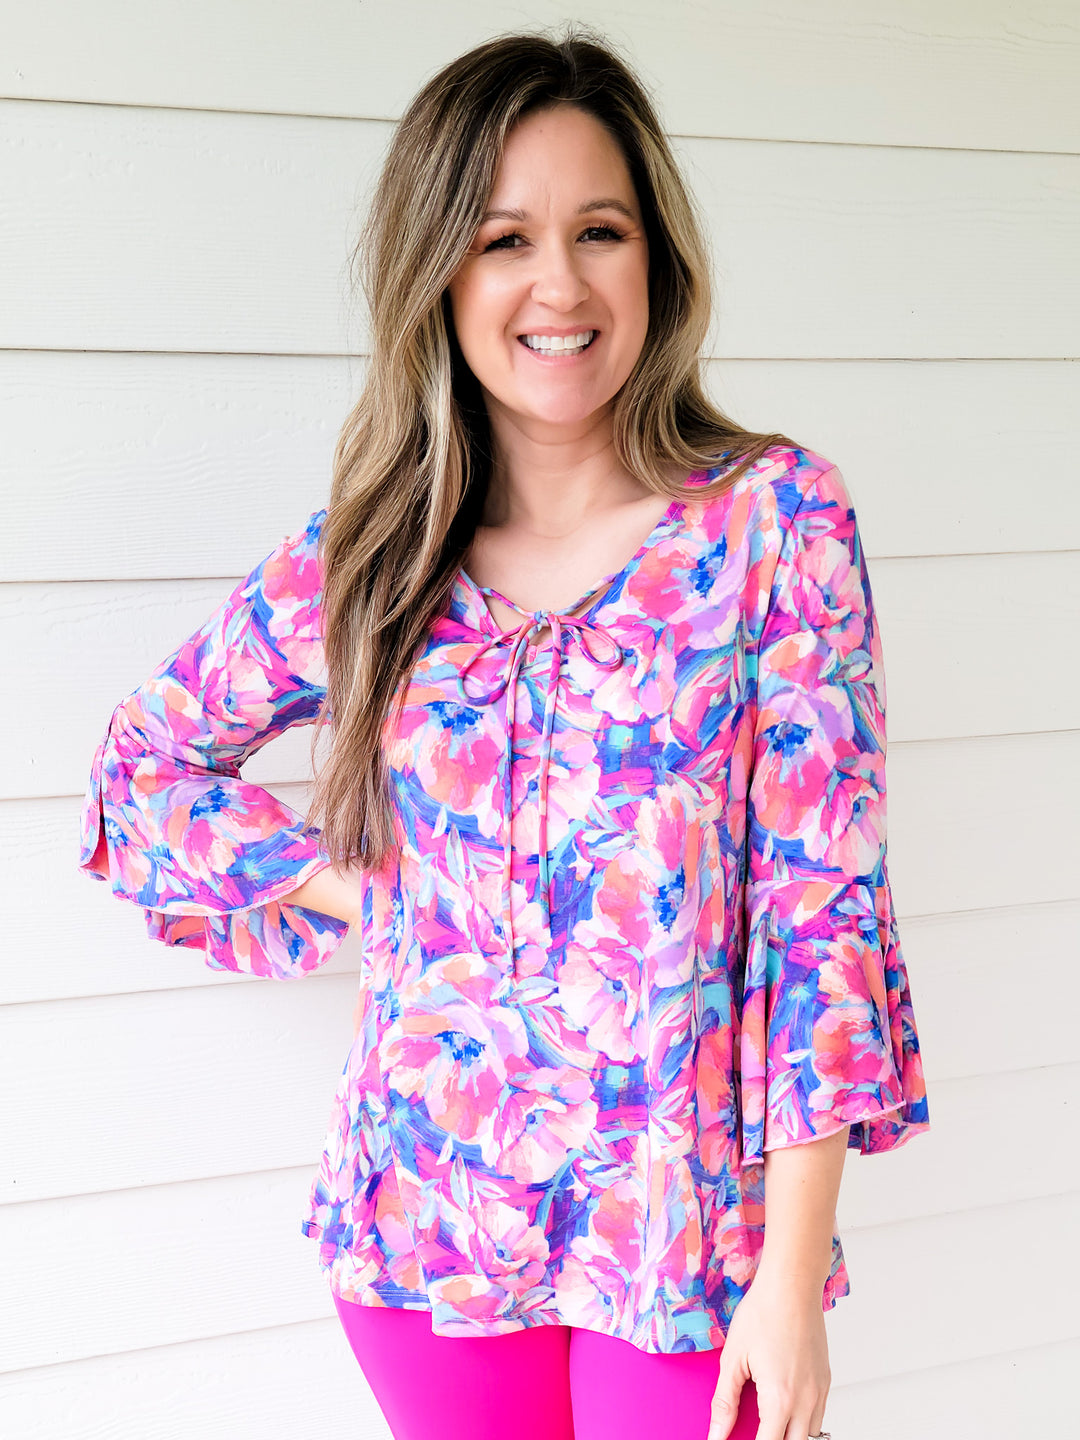 DEAR SCARLETT STRETCHY TIE FRONT TOP 3/4 SLEEVES - ROYAL PINK FLOWER